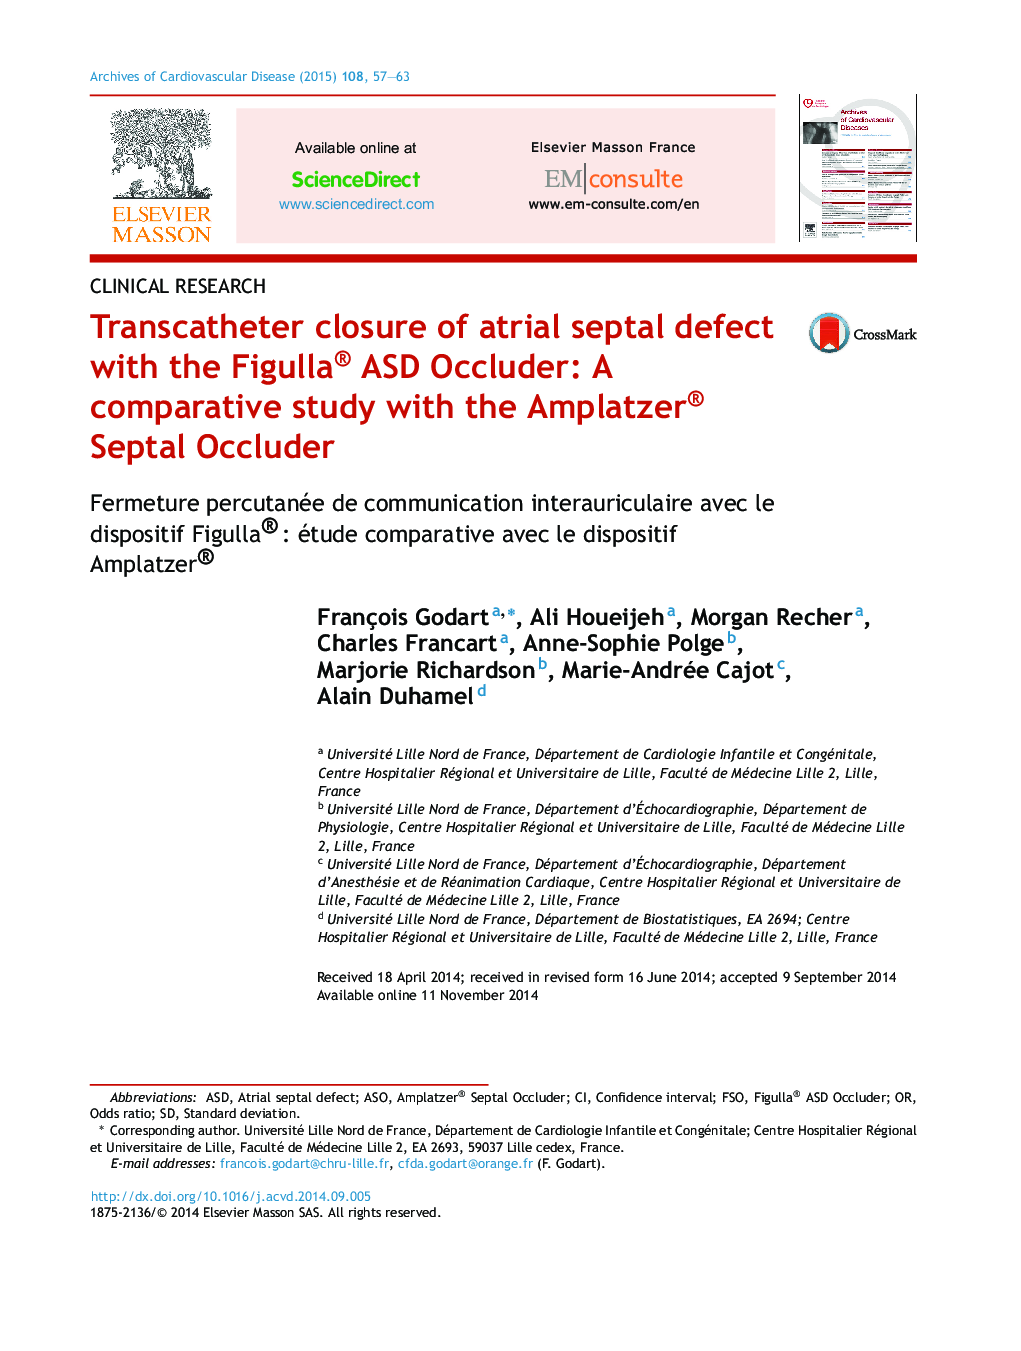 Transcatheter closure of atrial septal defect with the Figulla® ASD Occluder: A comparative study with the Amplatzer® Septal Occluder